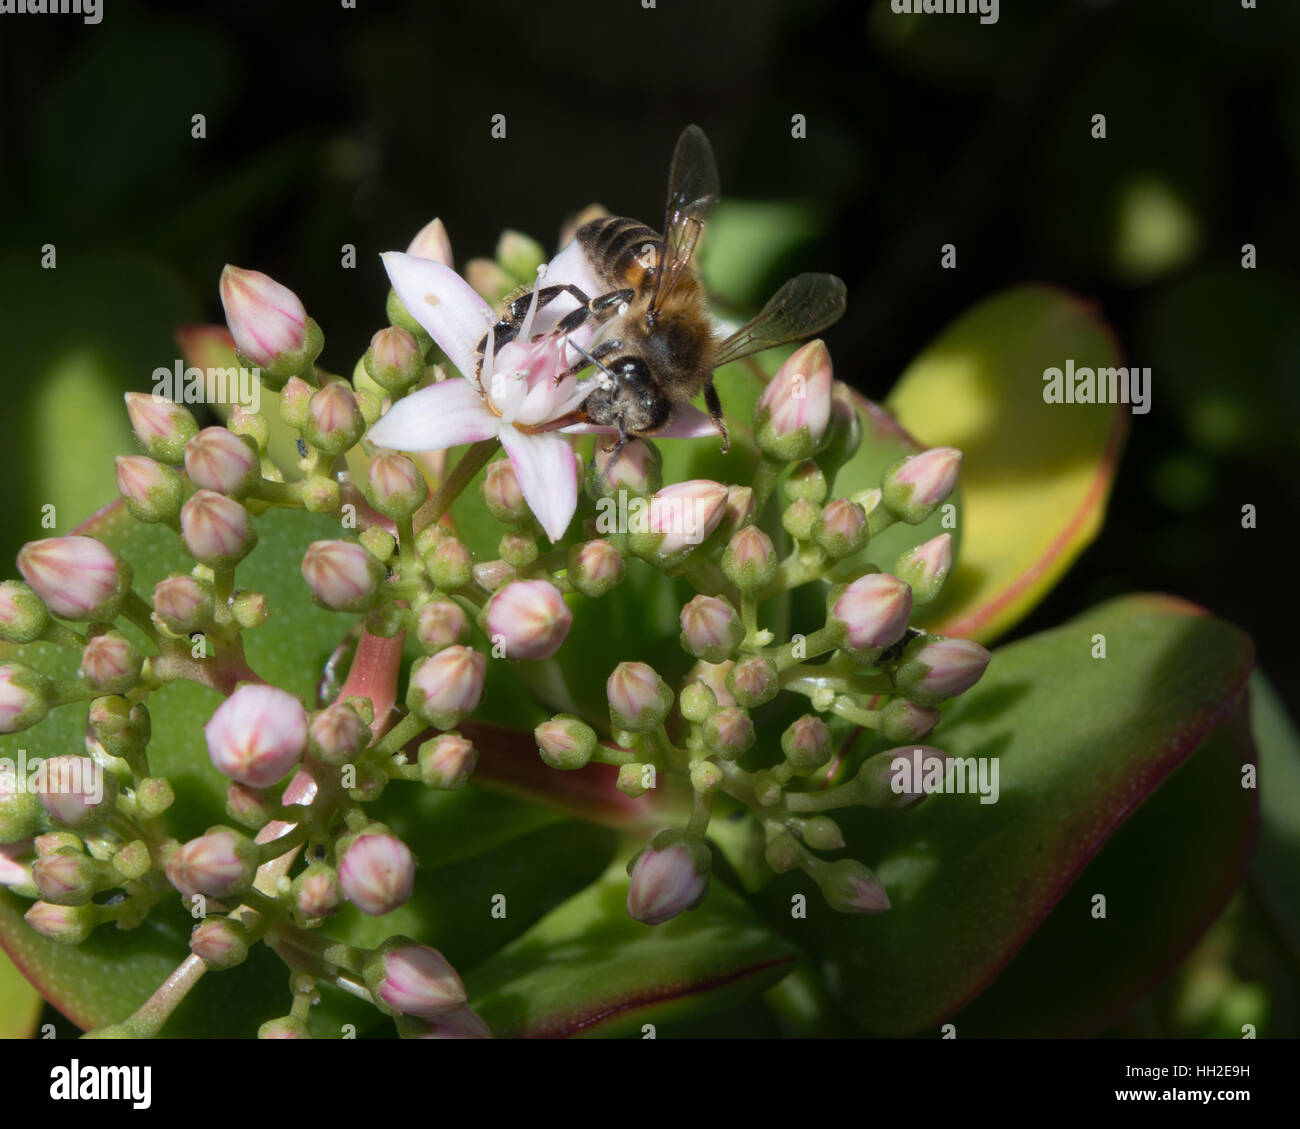 A Honeybee collecting pollen from a Jade Plant Stock Photo